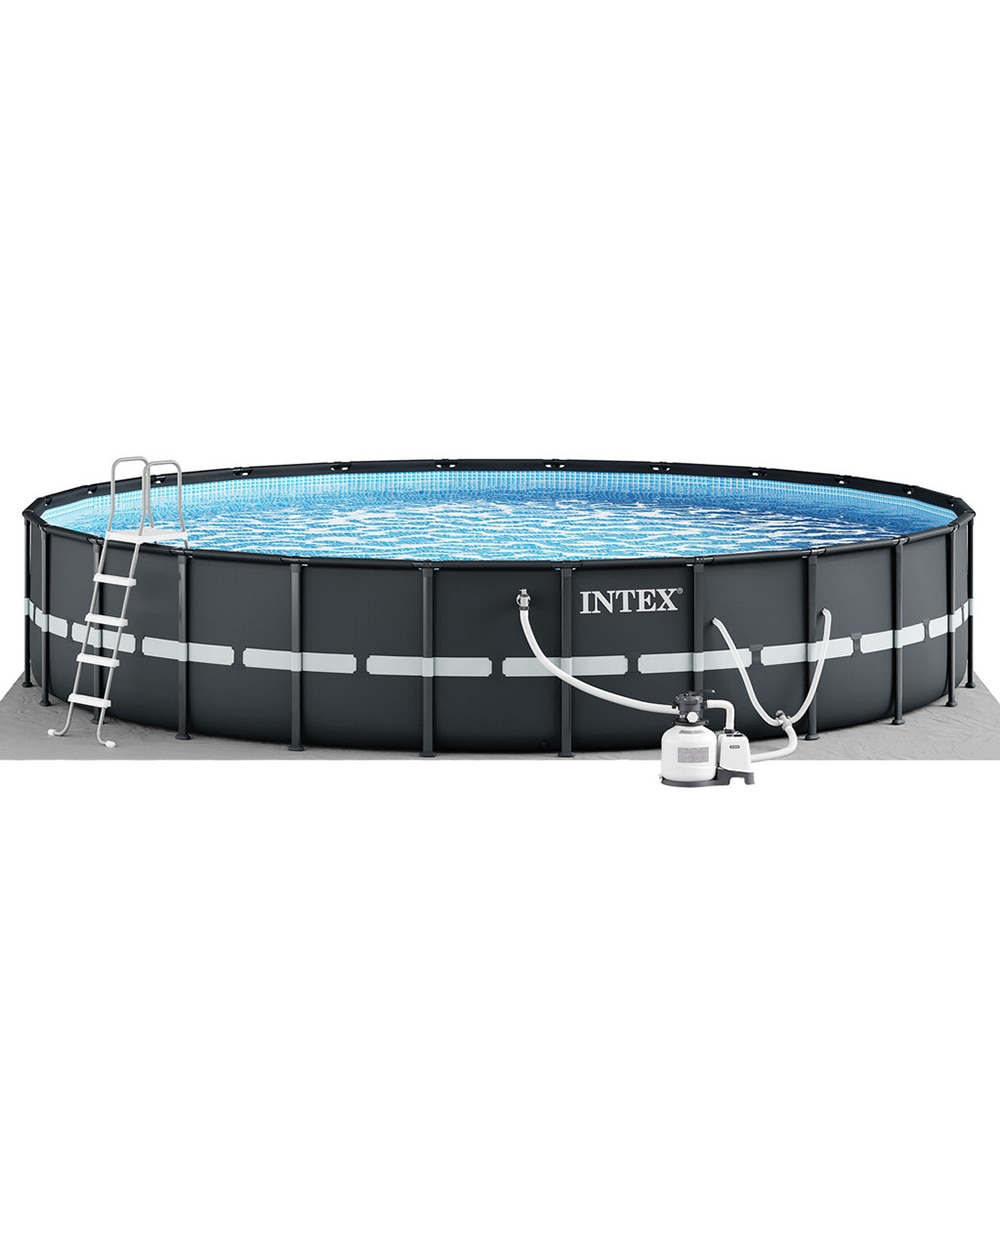 Intex 24' x 4.4' Ultra XTR Above-Ground Pool with Sand Filter Pump